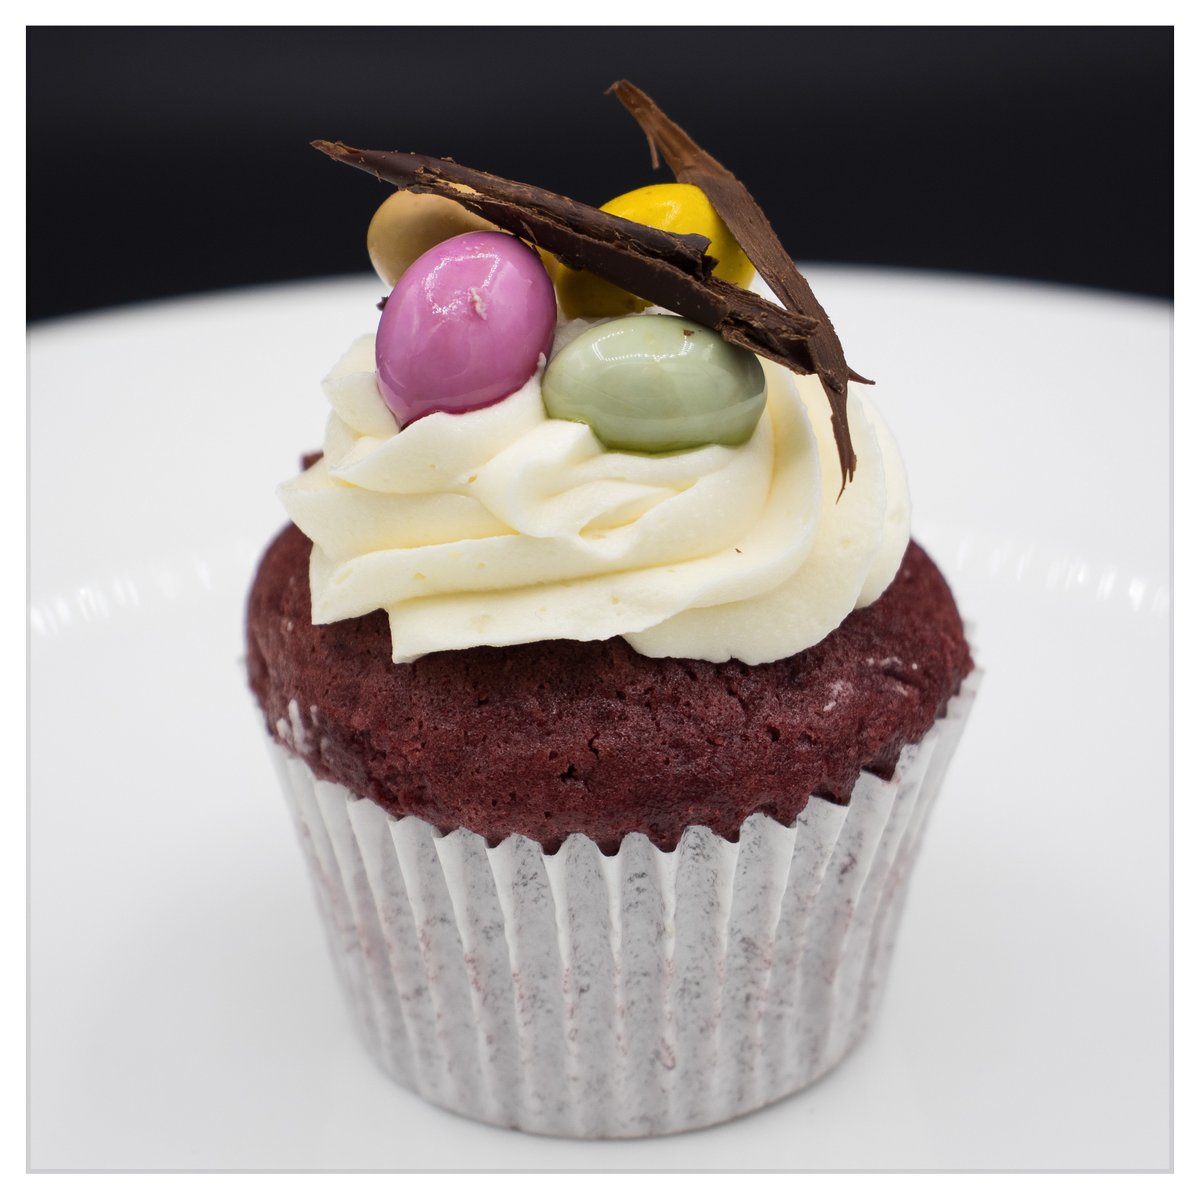 Make sure you do not miss out on these amazing Easter, red velvet cup cakes with vanilla frosting, mini eggs and a chocolate shard!

Available today onwards . . .
 
#BakedGoods
#Bromptoncemetery
#Cafe
#ColdDrinks
#CooksandPartners
#CraftedCoffee
#Homemade
#LocallySourced